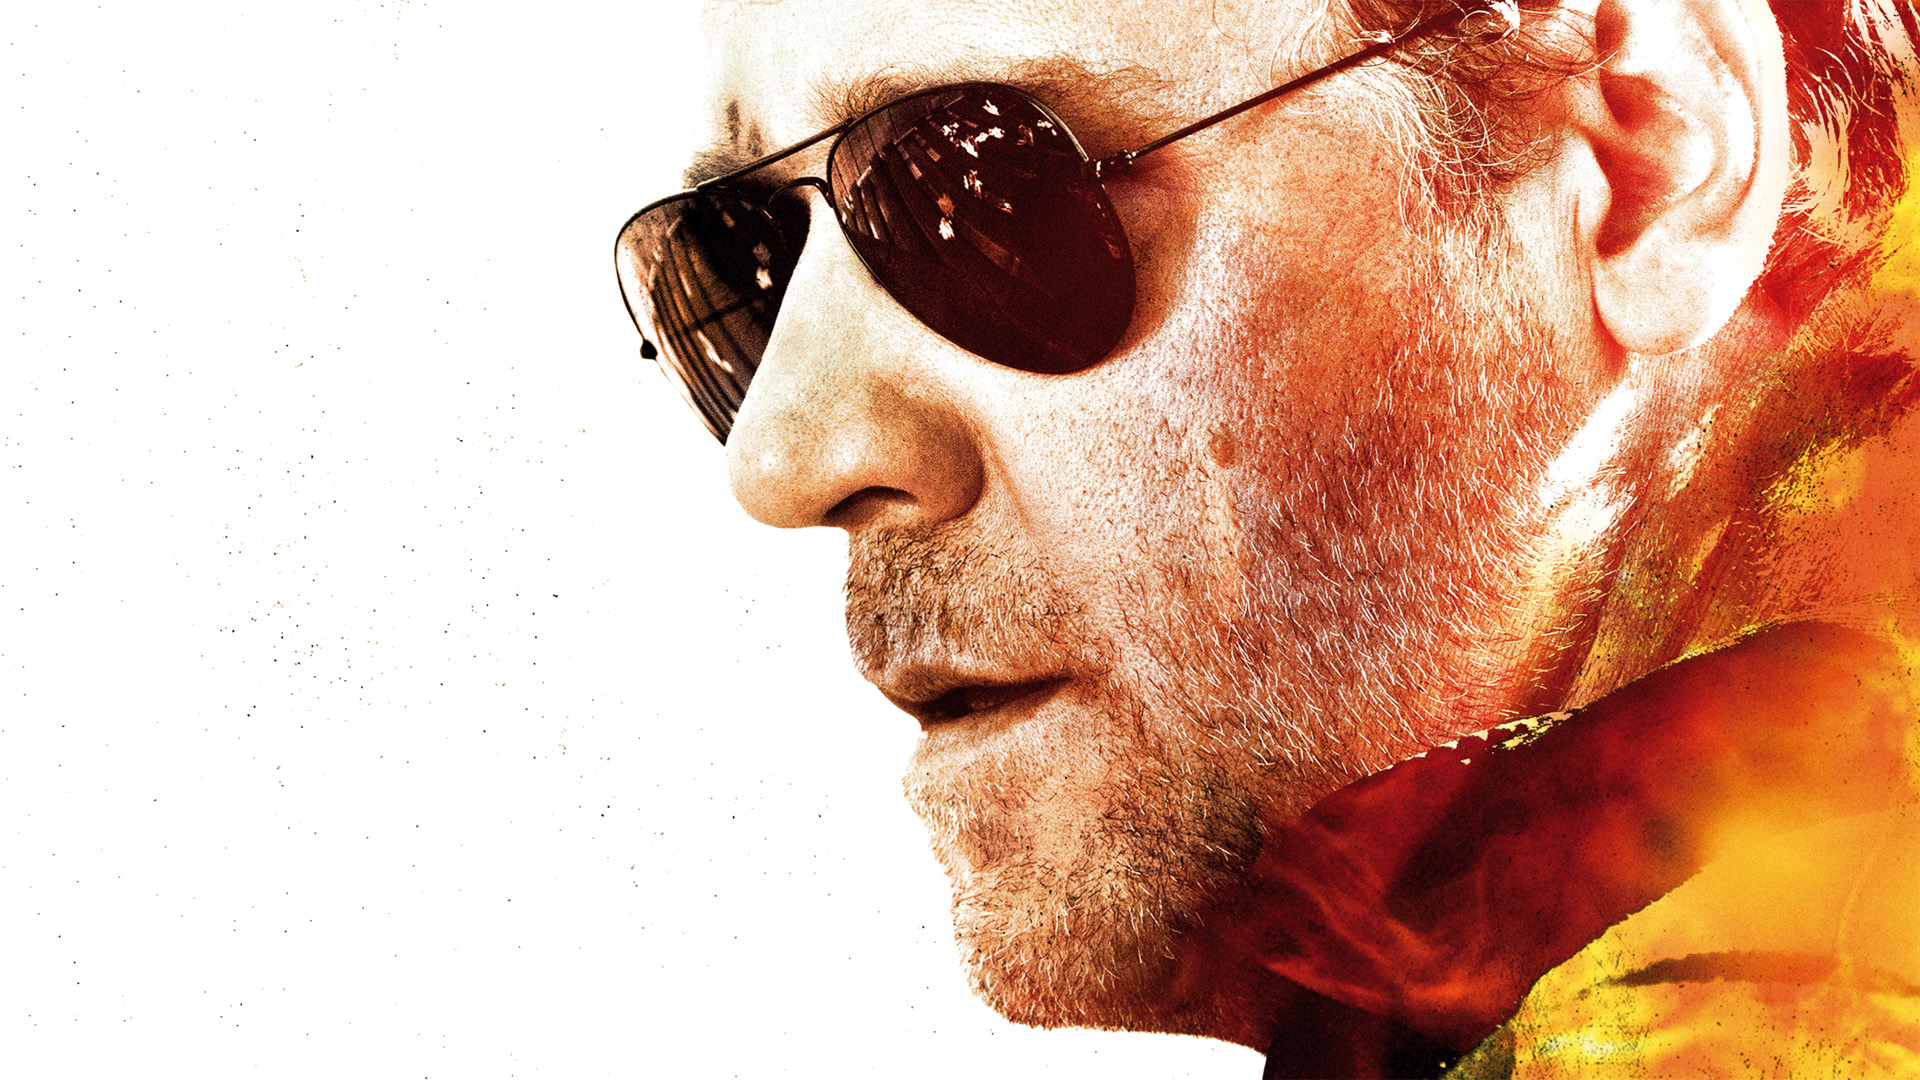 Wallpaper The Next Three Days, 2010 movie, Russell Crowe, face, sunglasses